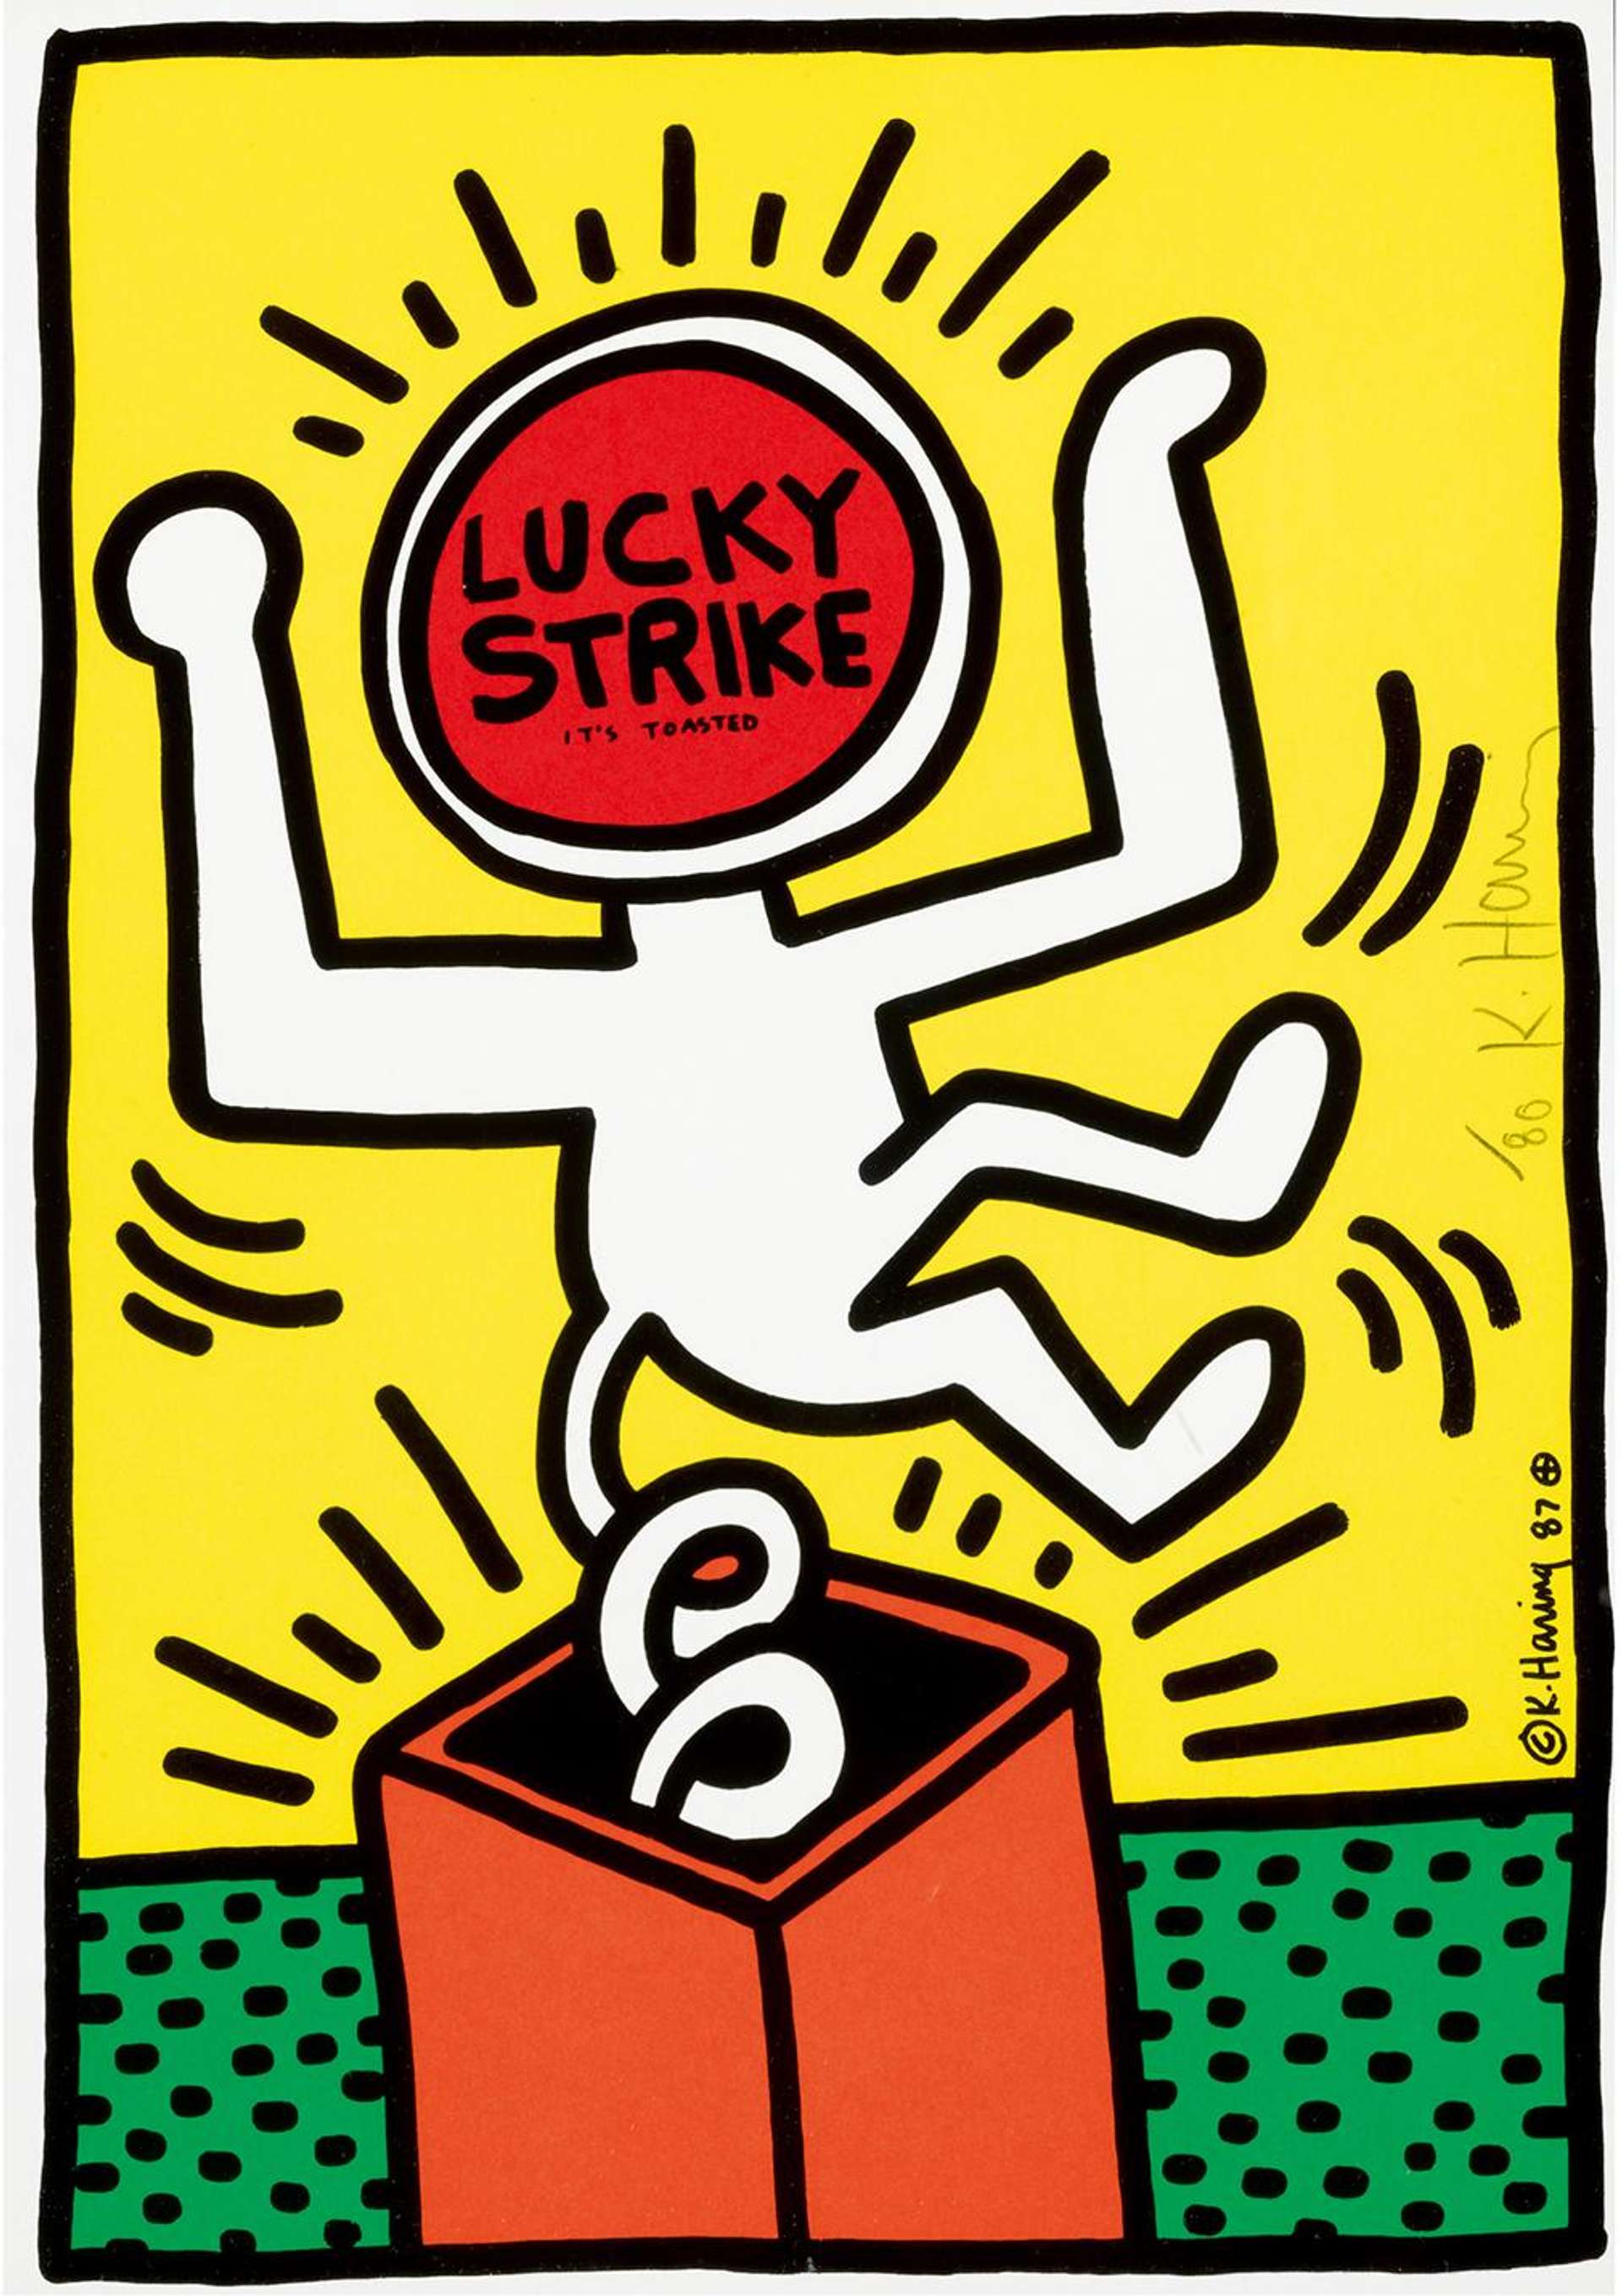 An image of the yellow lucky strike by Keith Haring depicting a figure bouncing up out of a brown box